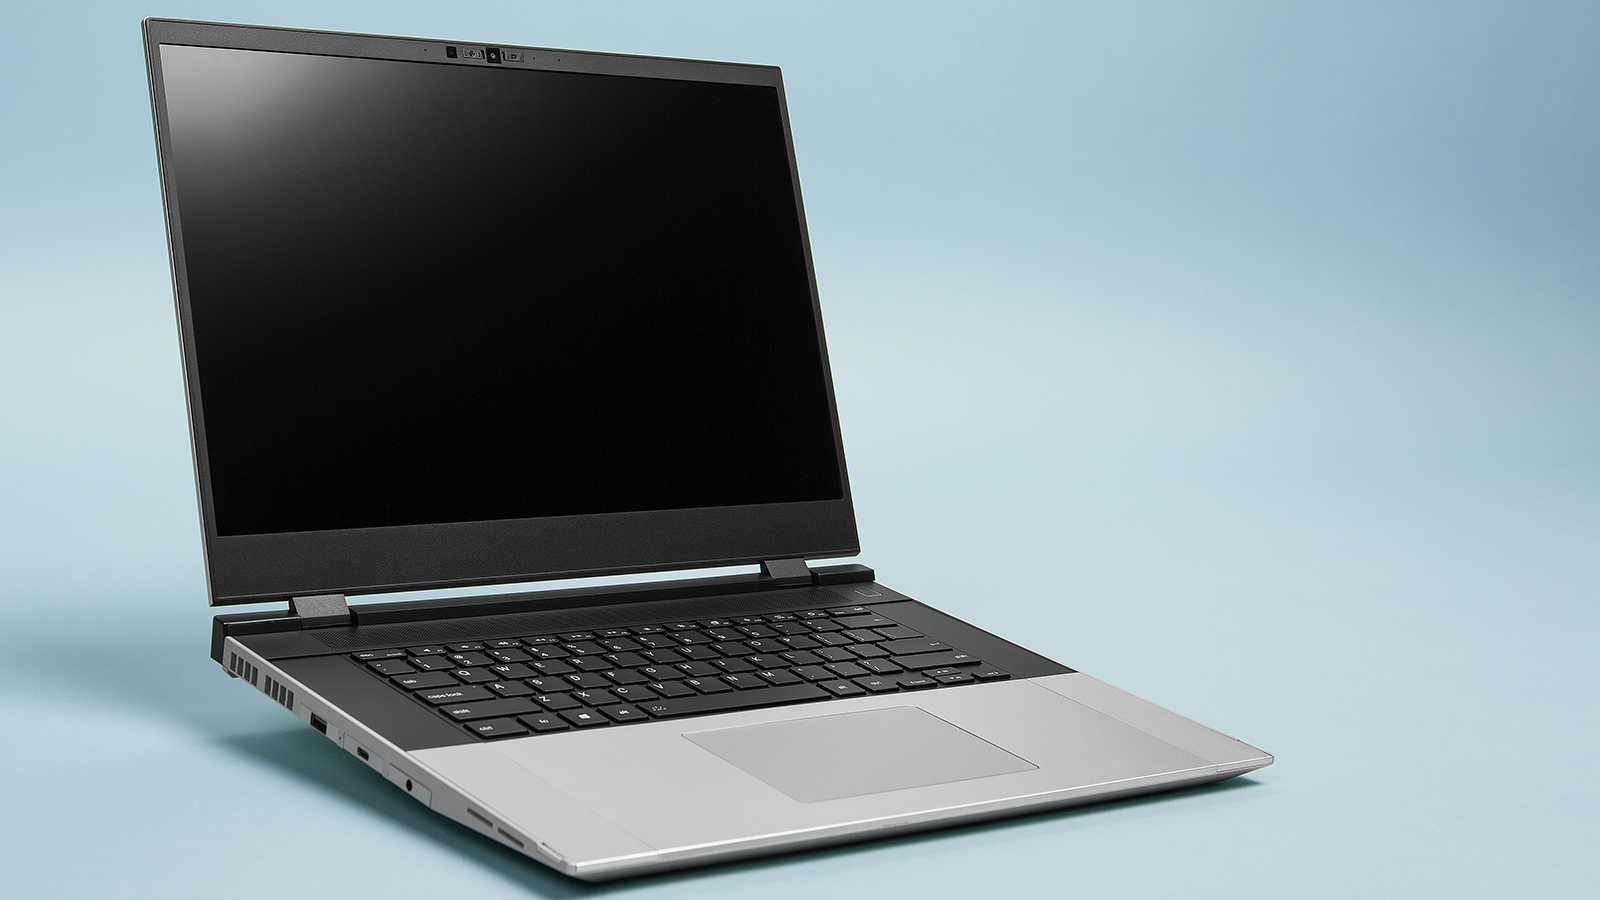 16 Inch Laptop With An Upgradeable Gpu